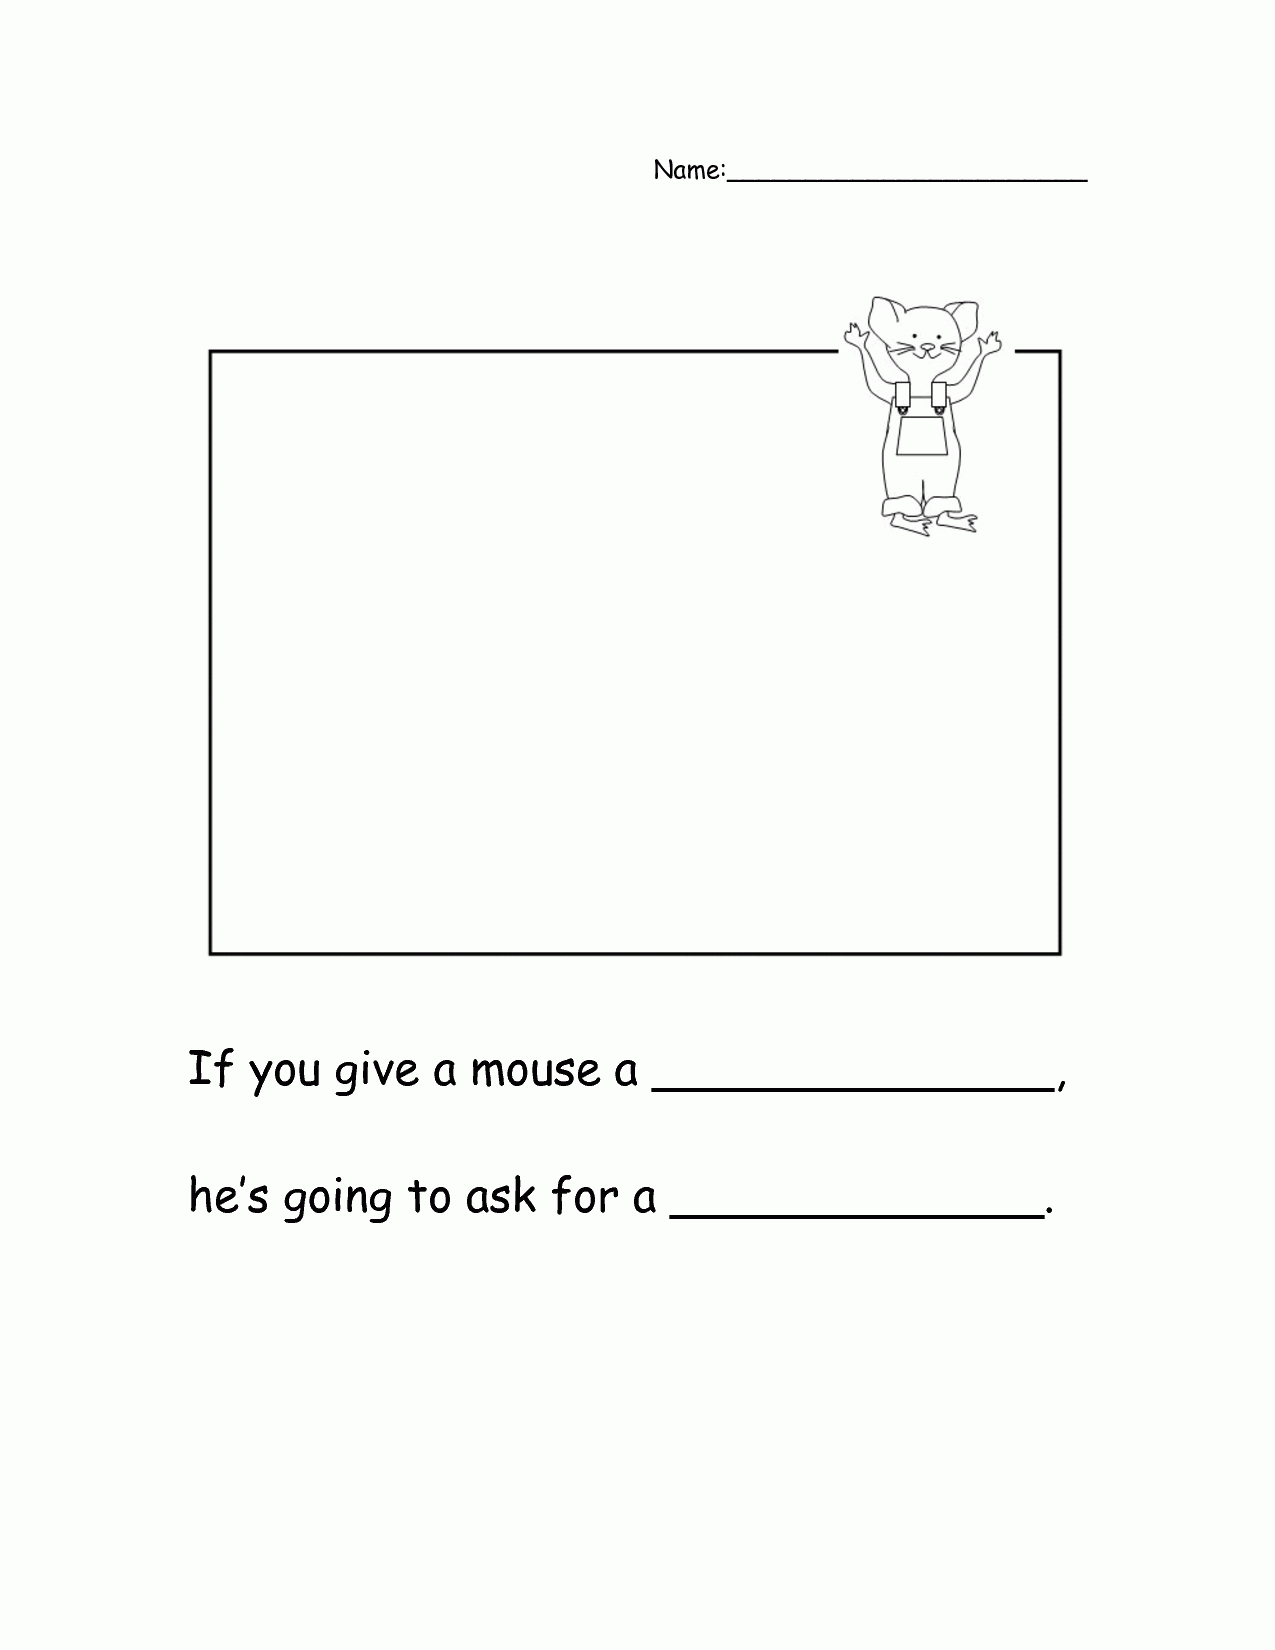 free-if-you-give-a-mouse-a-cookie-coloring-pages-free-download-free-if